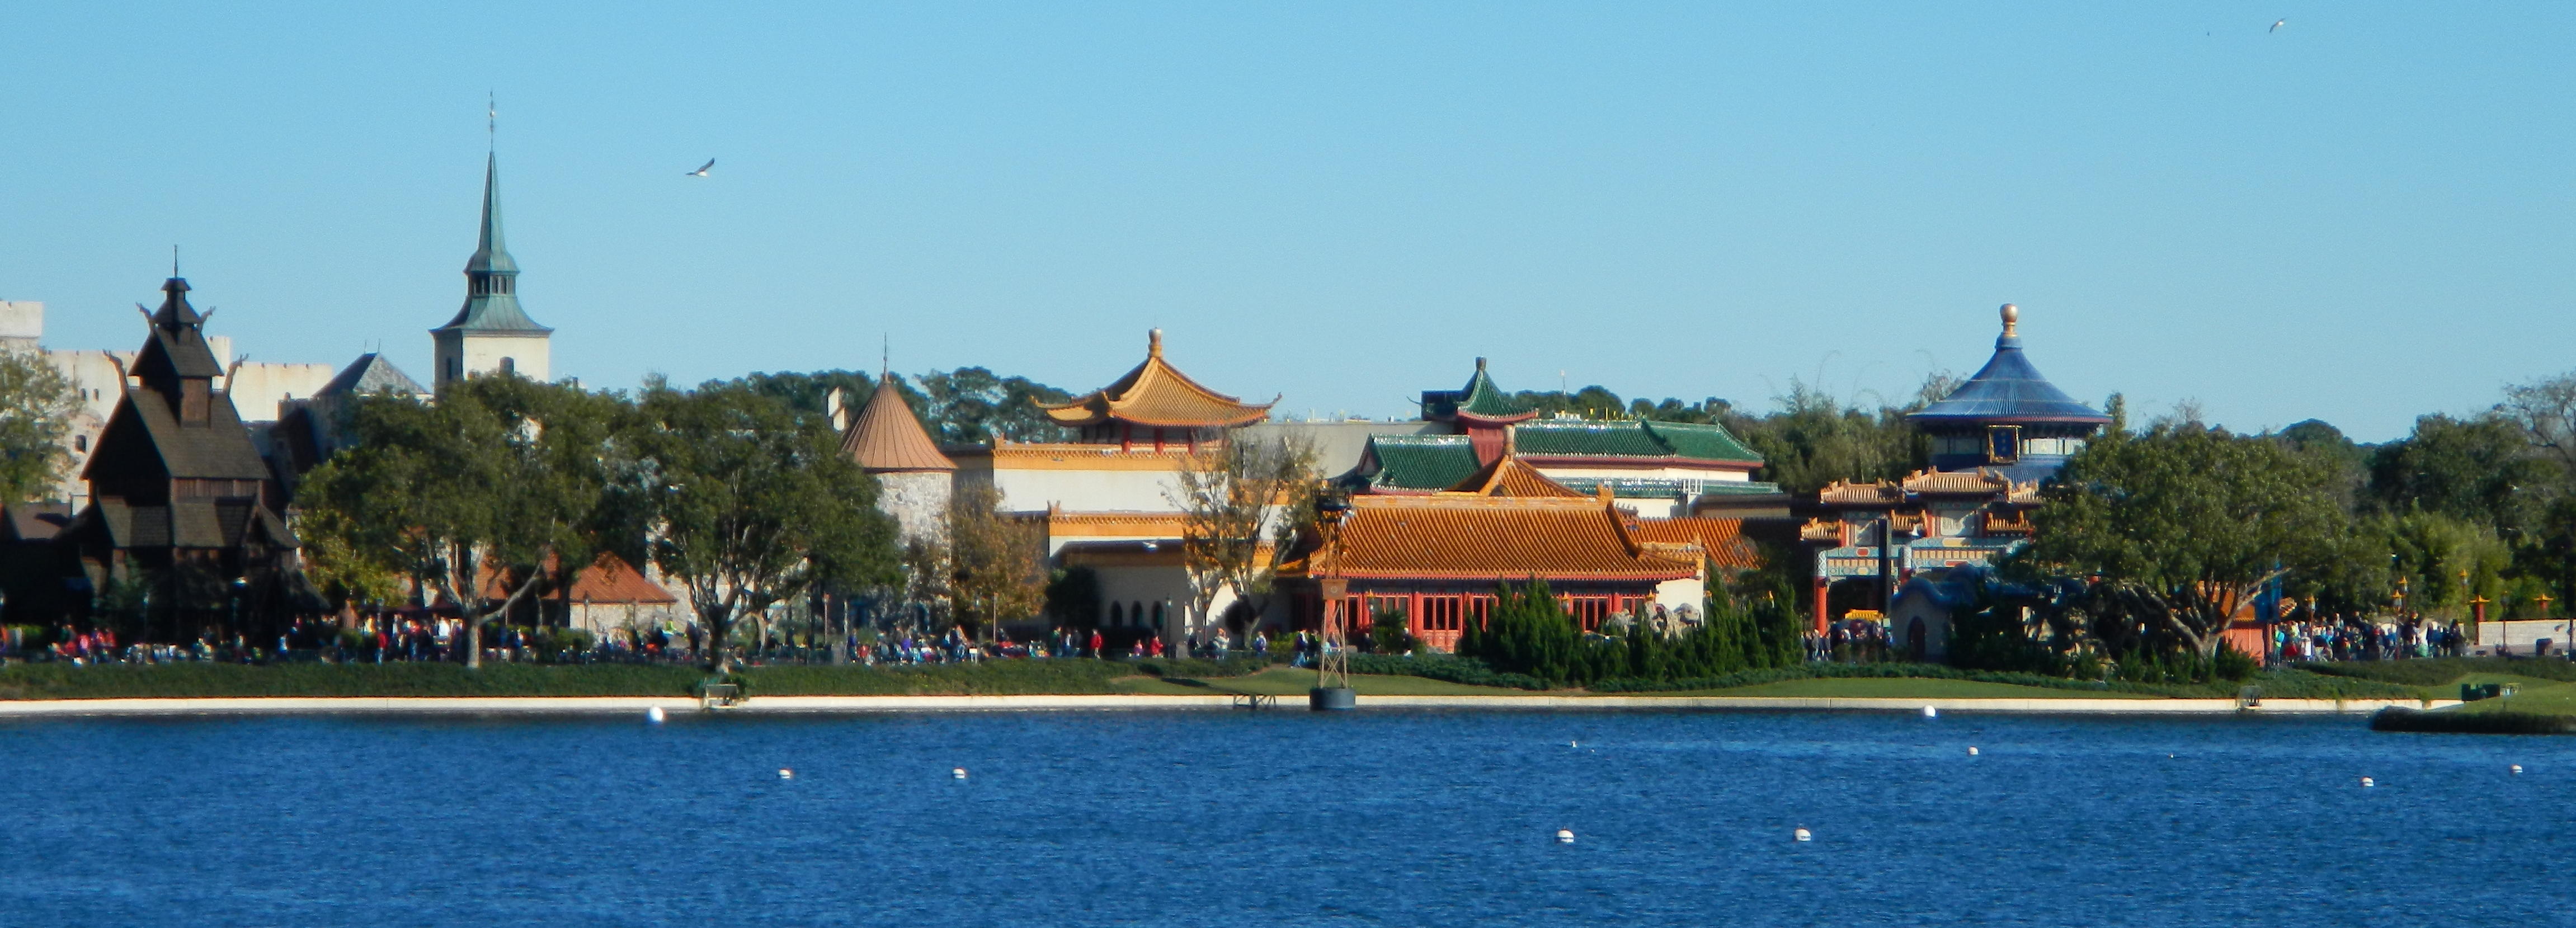 Misc - Epcot - China and Norway